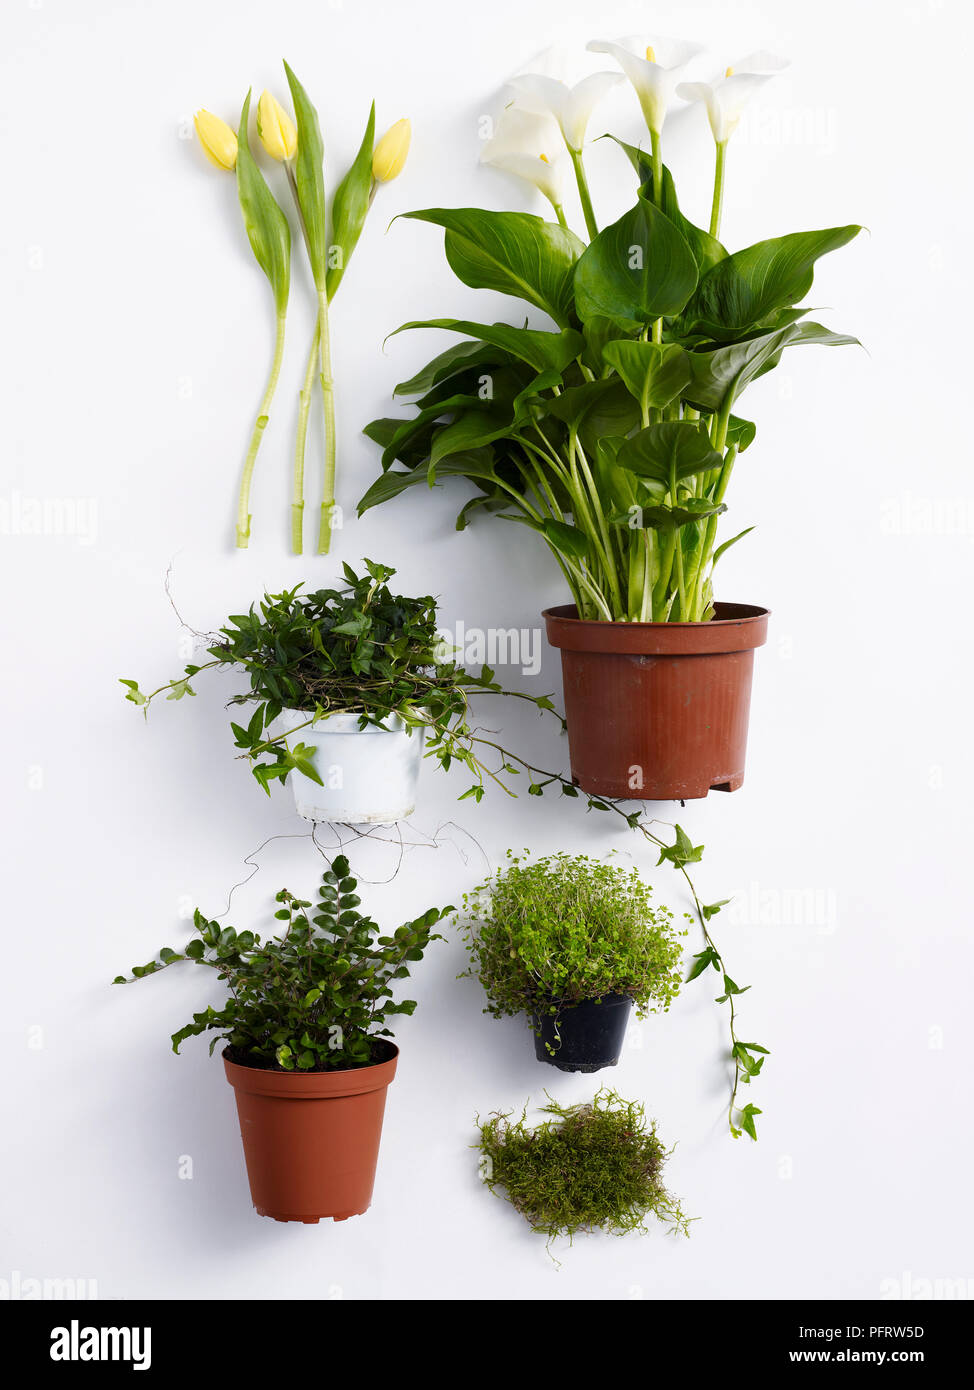 Plants for creating a plantique, tulips, calla lilies, trailing ivy, moss, baby's tears, muehlenbeckia Stock Photo